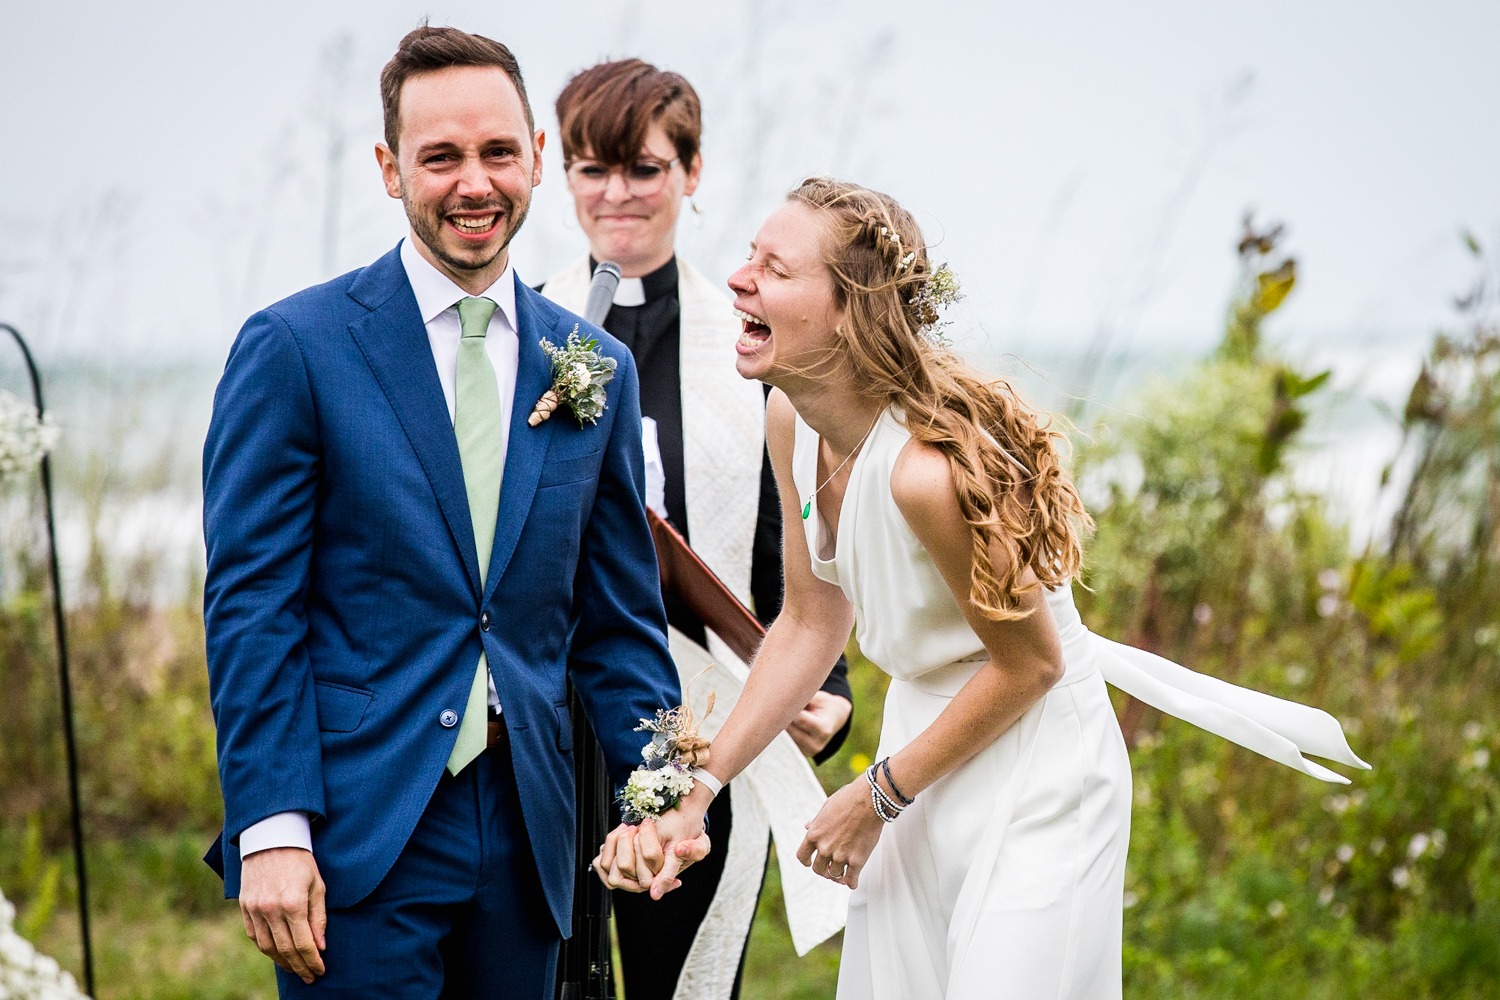 A couple reacts after exchanging their vows during an Illinois Beach Resort wedding ceremony